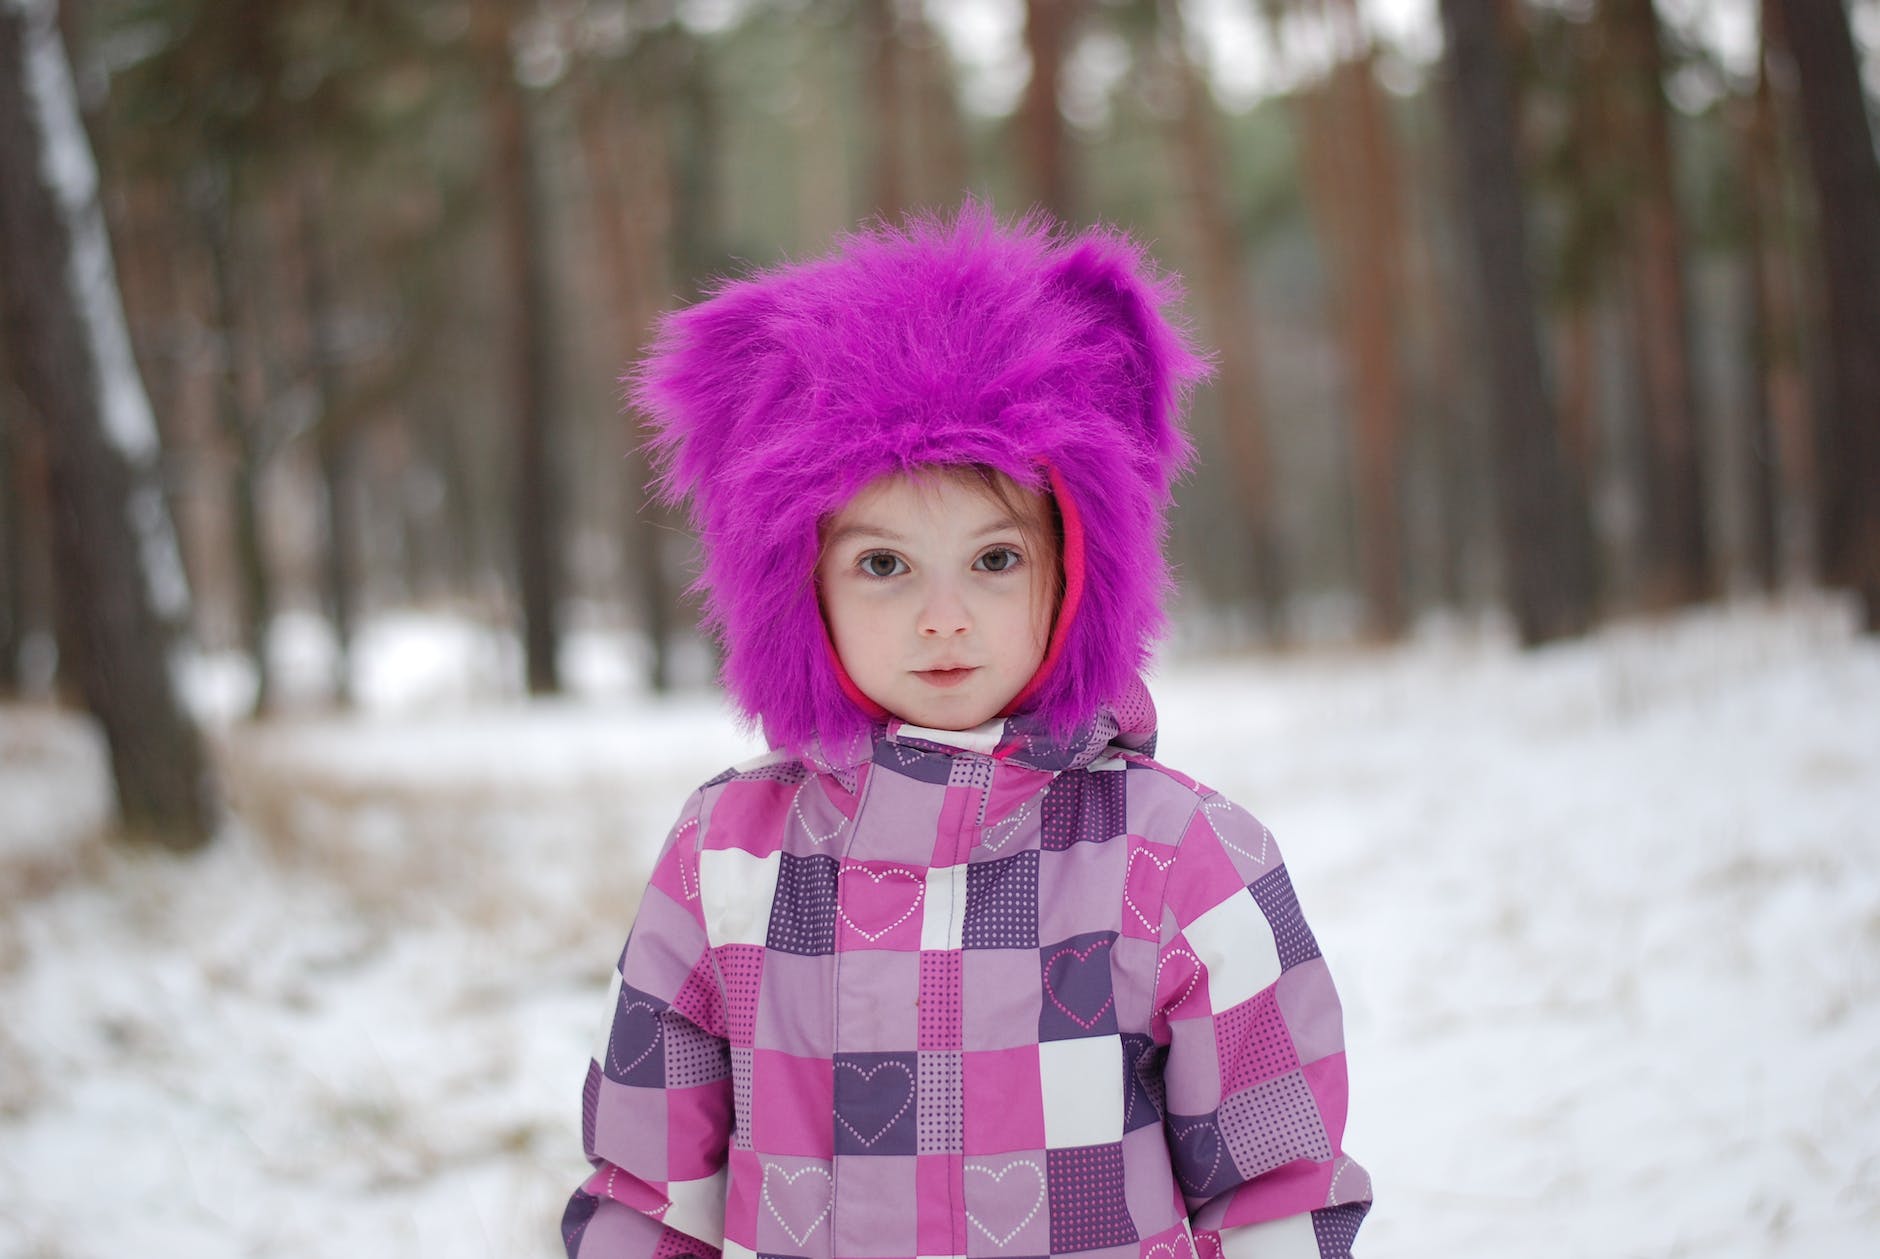 Wintery Mix Wednesday: Top 5 Winter Gear Items for Kids